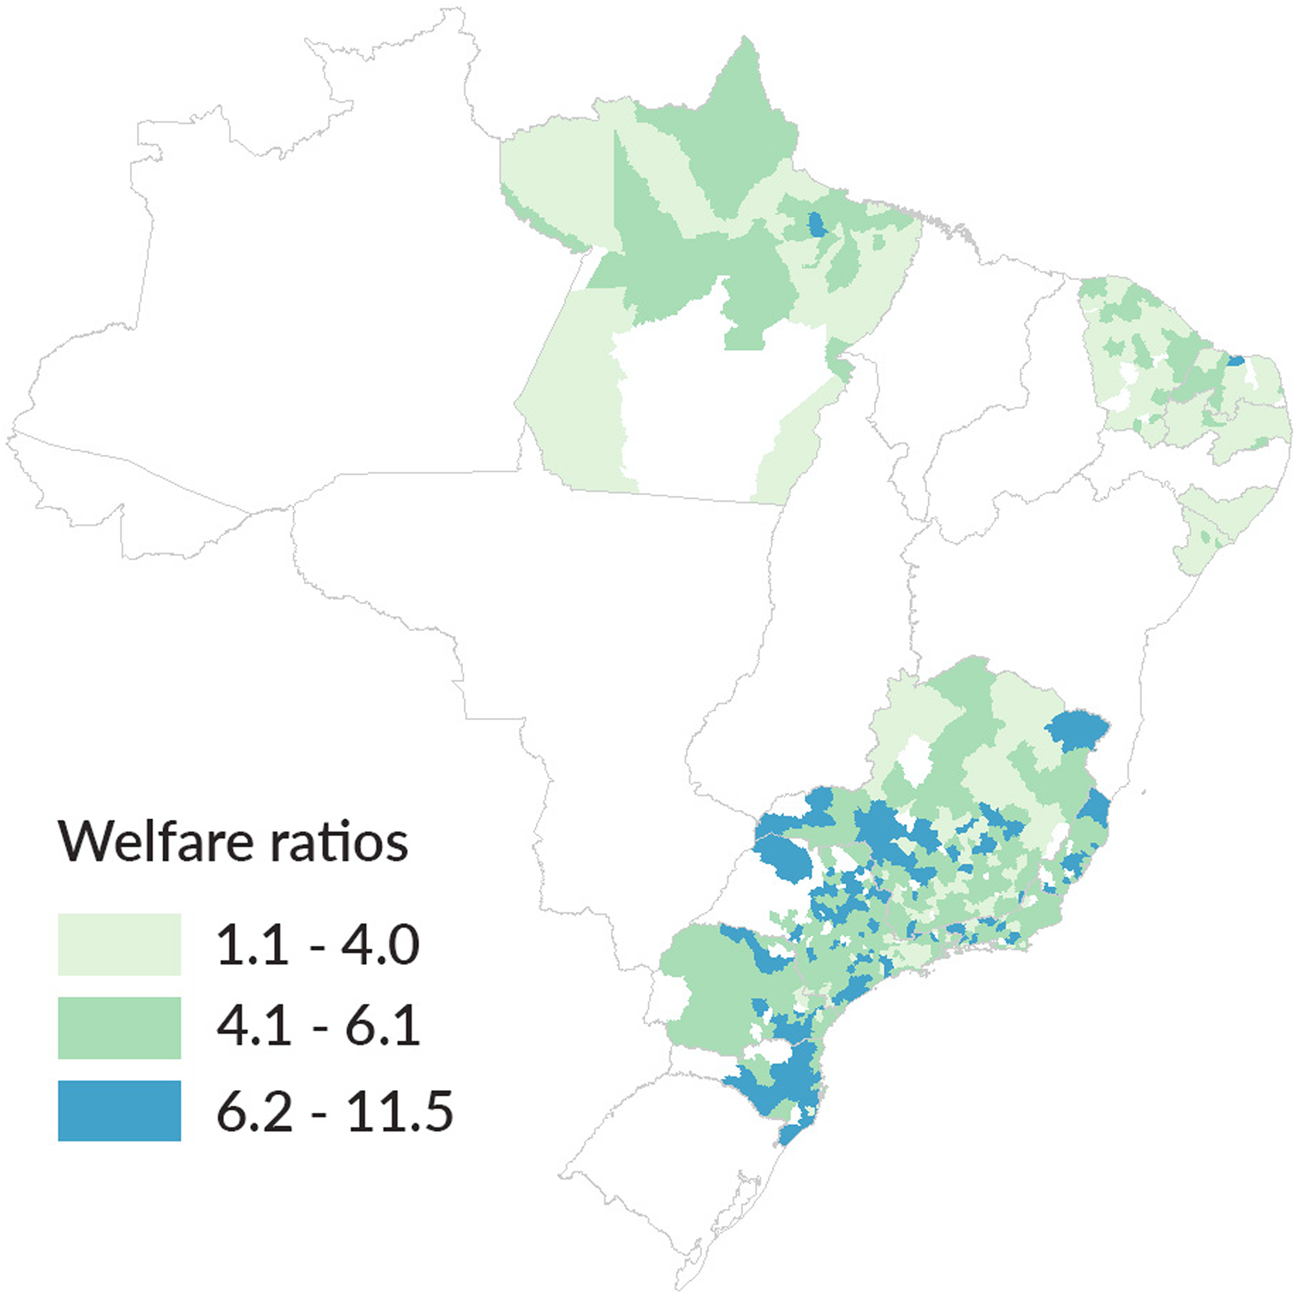 THE NORTH–SOUTH DIVIDE: REAL WAGES AND WELFARE IN BRAZIL DURING THE EARLY  20TH CENTURY, Revista de Historia Economica - Journal of Iberian and Latin  American Economic History